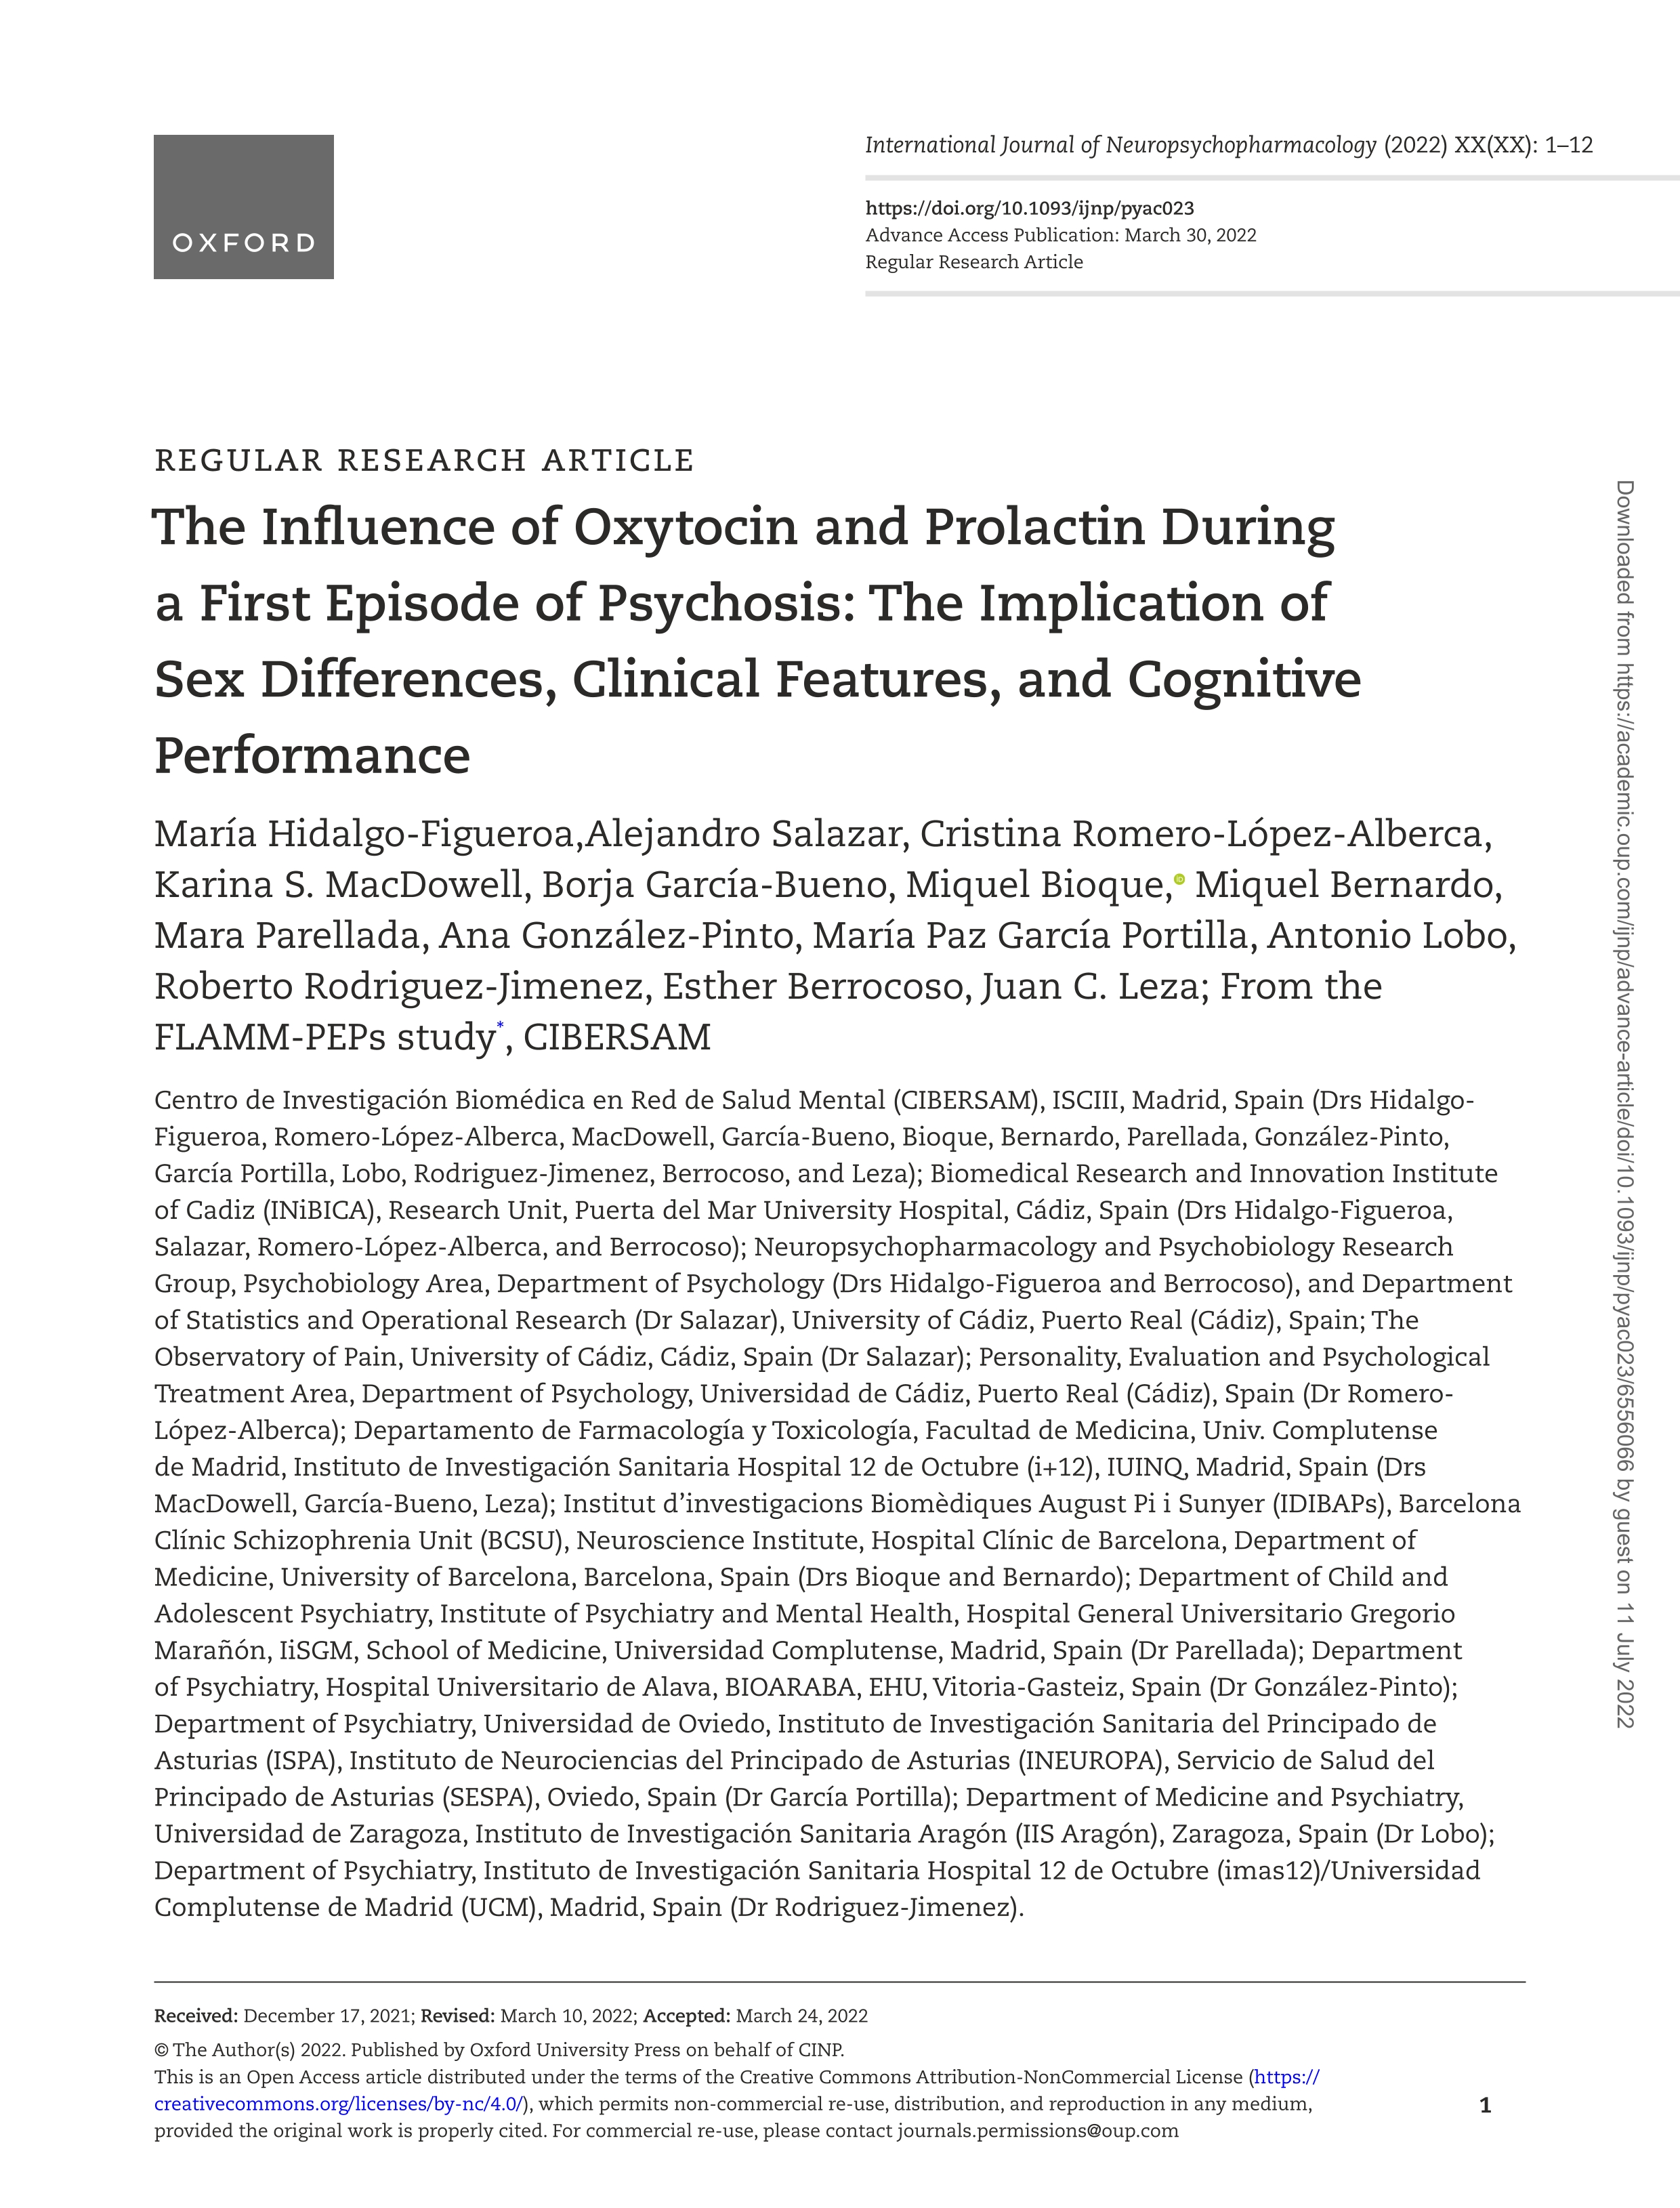 The Influence of Oxytocin and Prolactin During a First Episode of Psychosis: The Implication of Sex Differences, Clinical Features, and Cognitive Performance